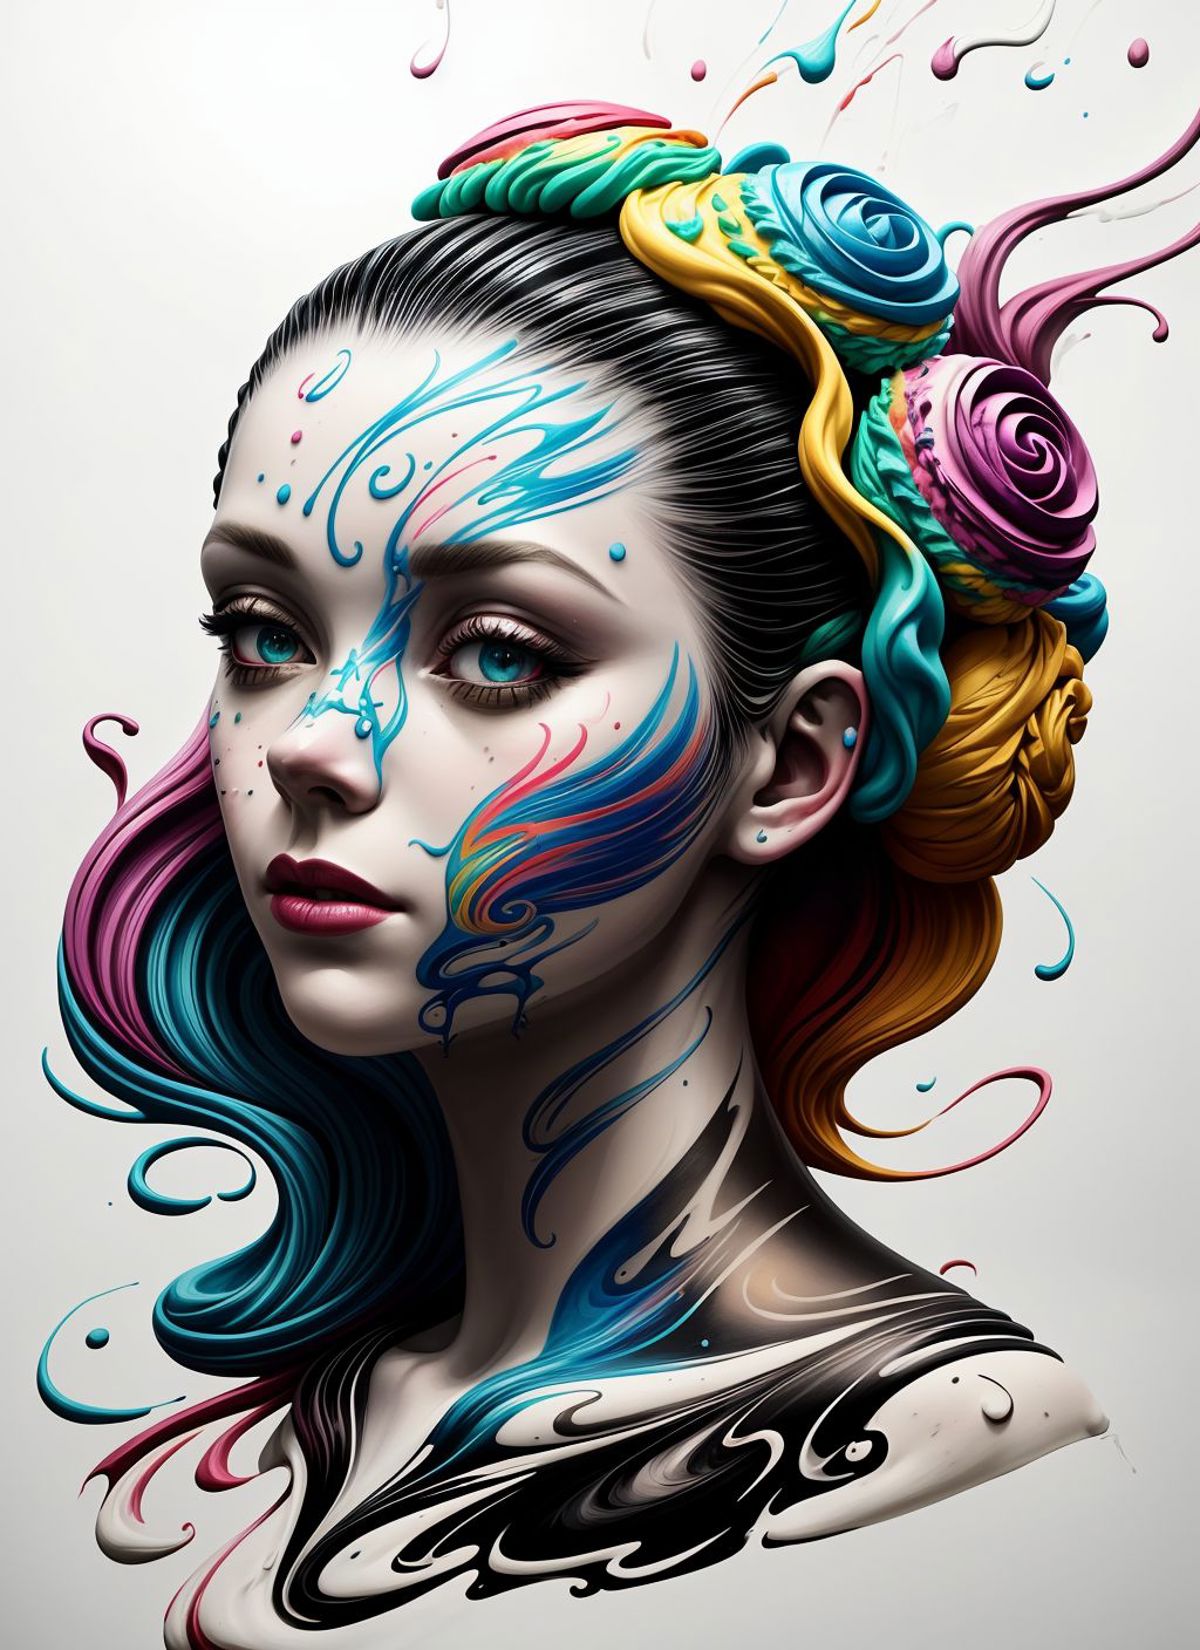 Style Paint Magic image by Mord